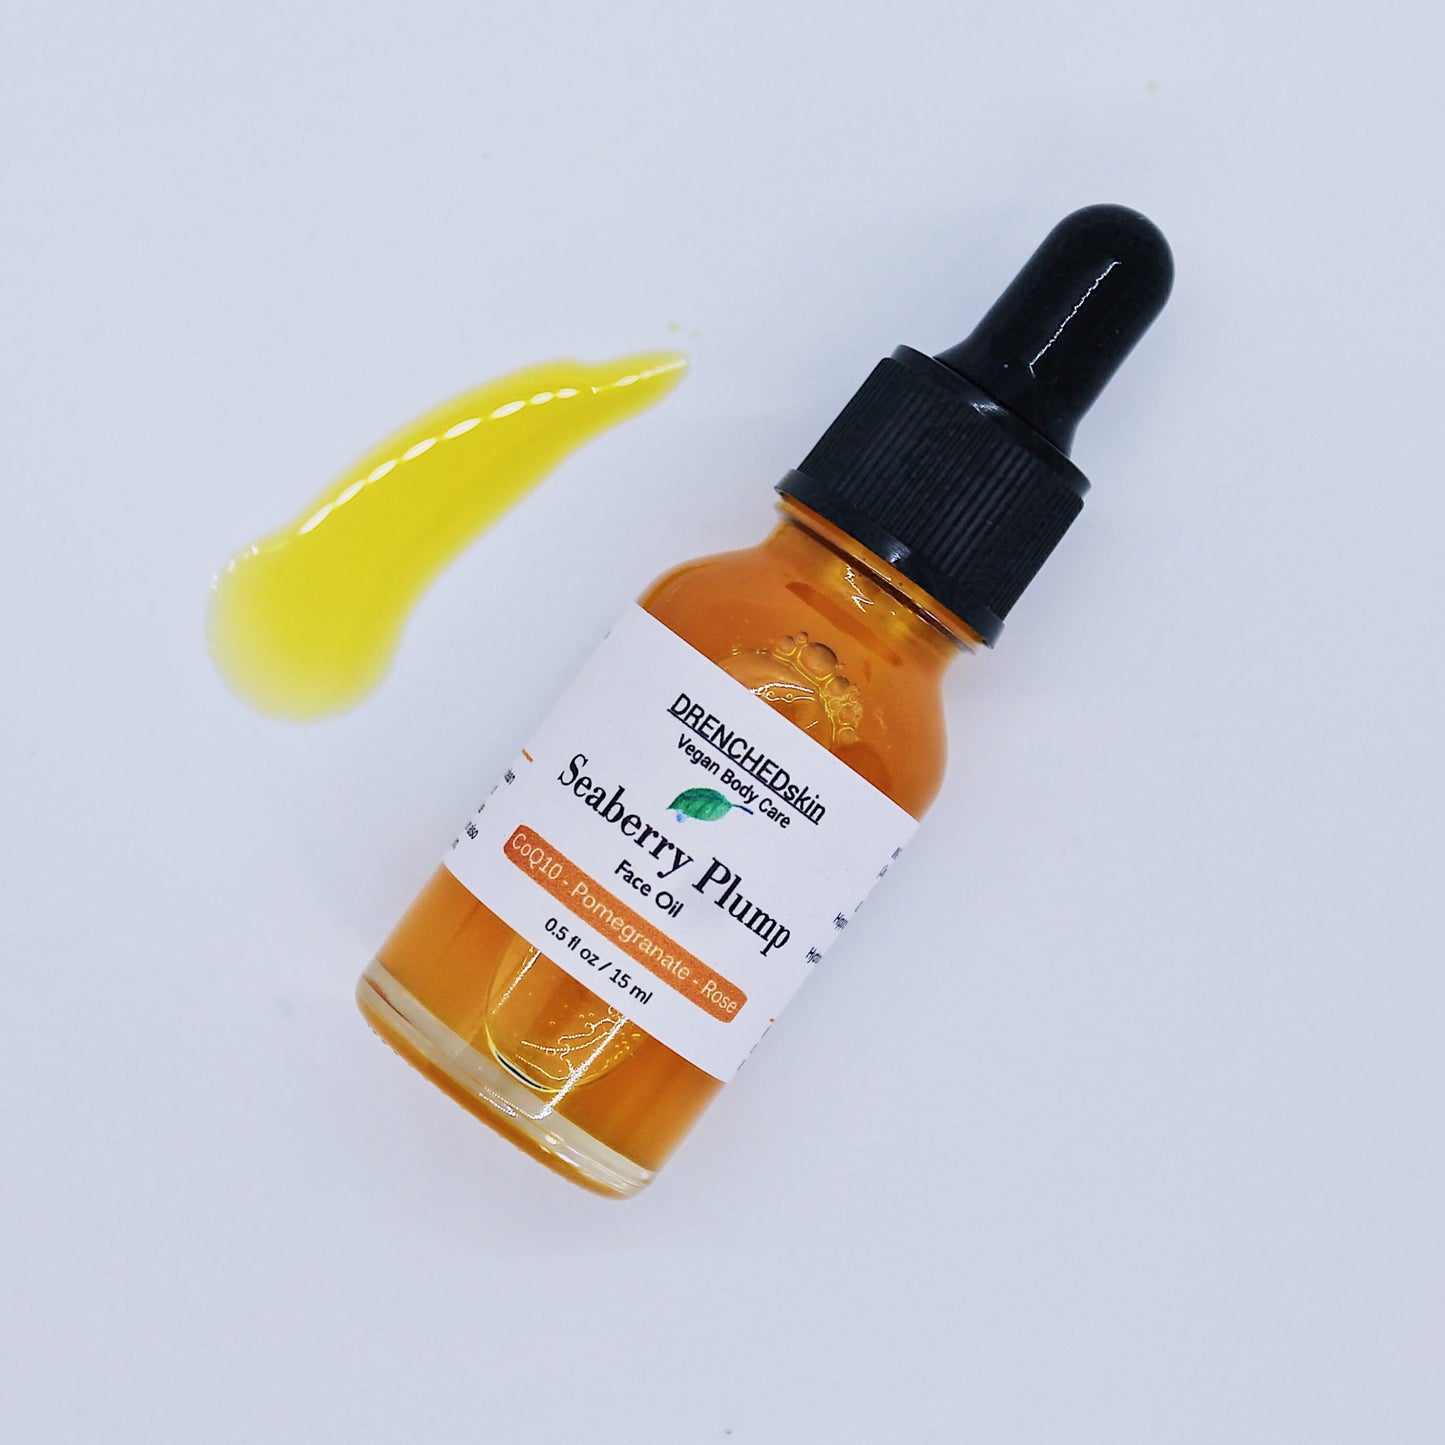 SEABERRY PLUMP Face Oil.